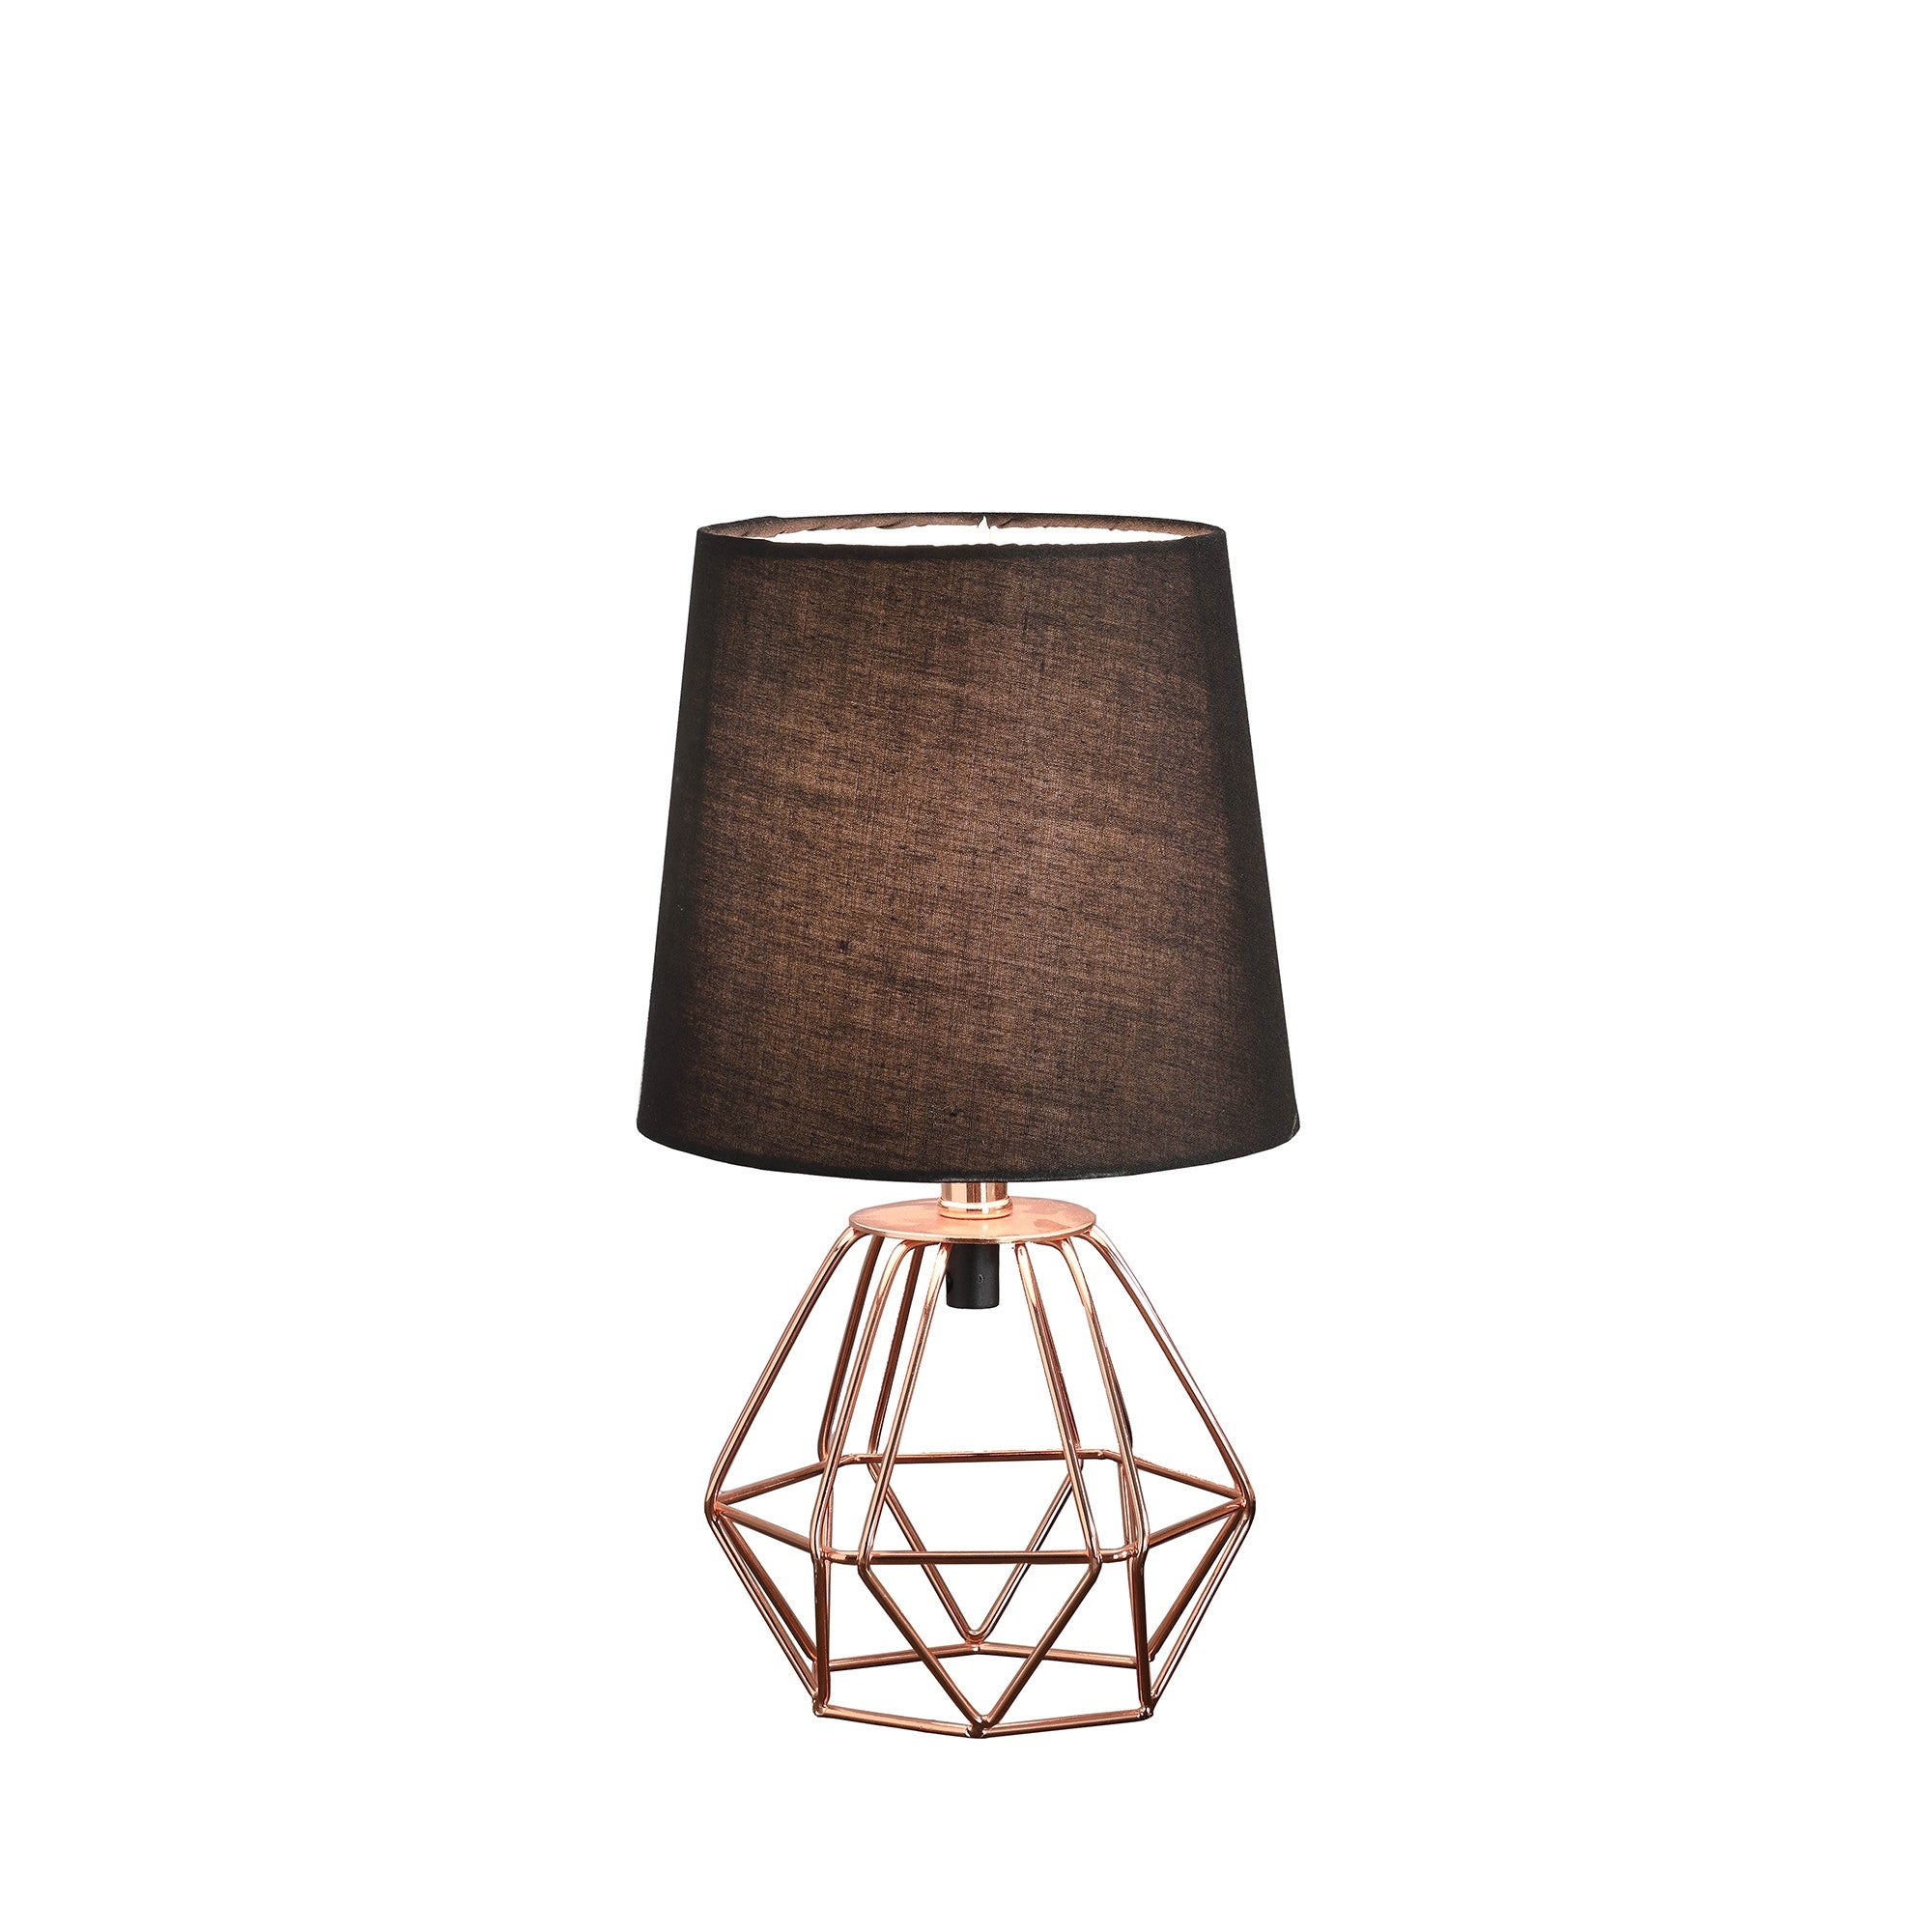 11" Copper Bedside Table Lamp With Black Empire Shade